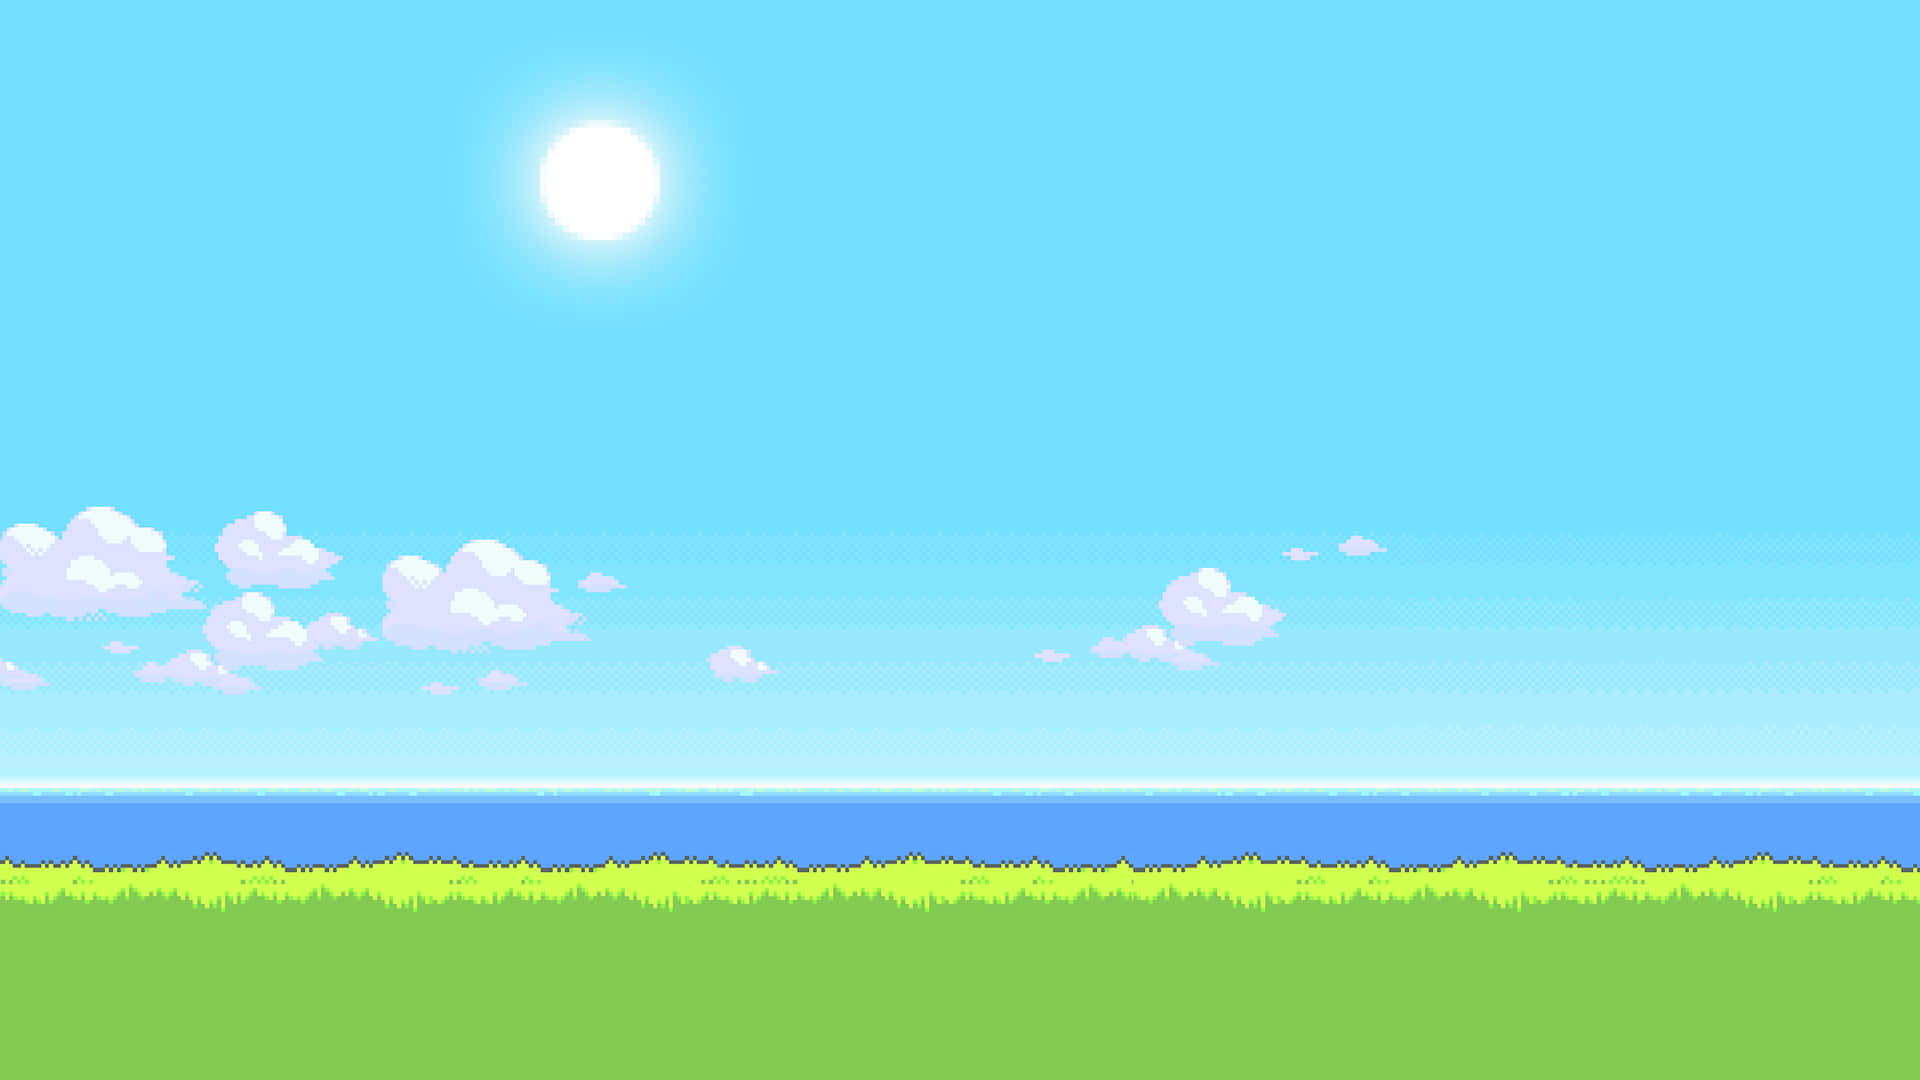 A Pixelated Image Of A Grassy Field With A Blue Sky Wallpaper